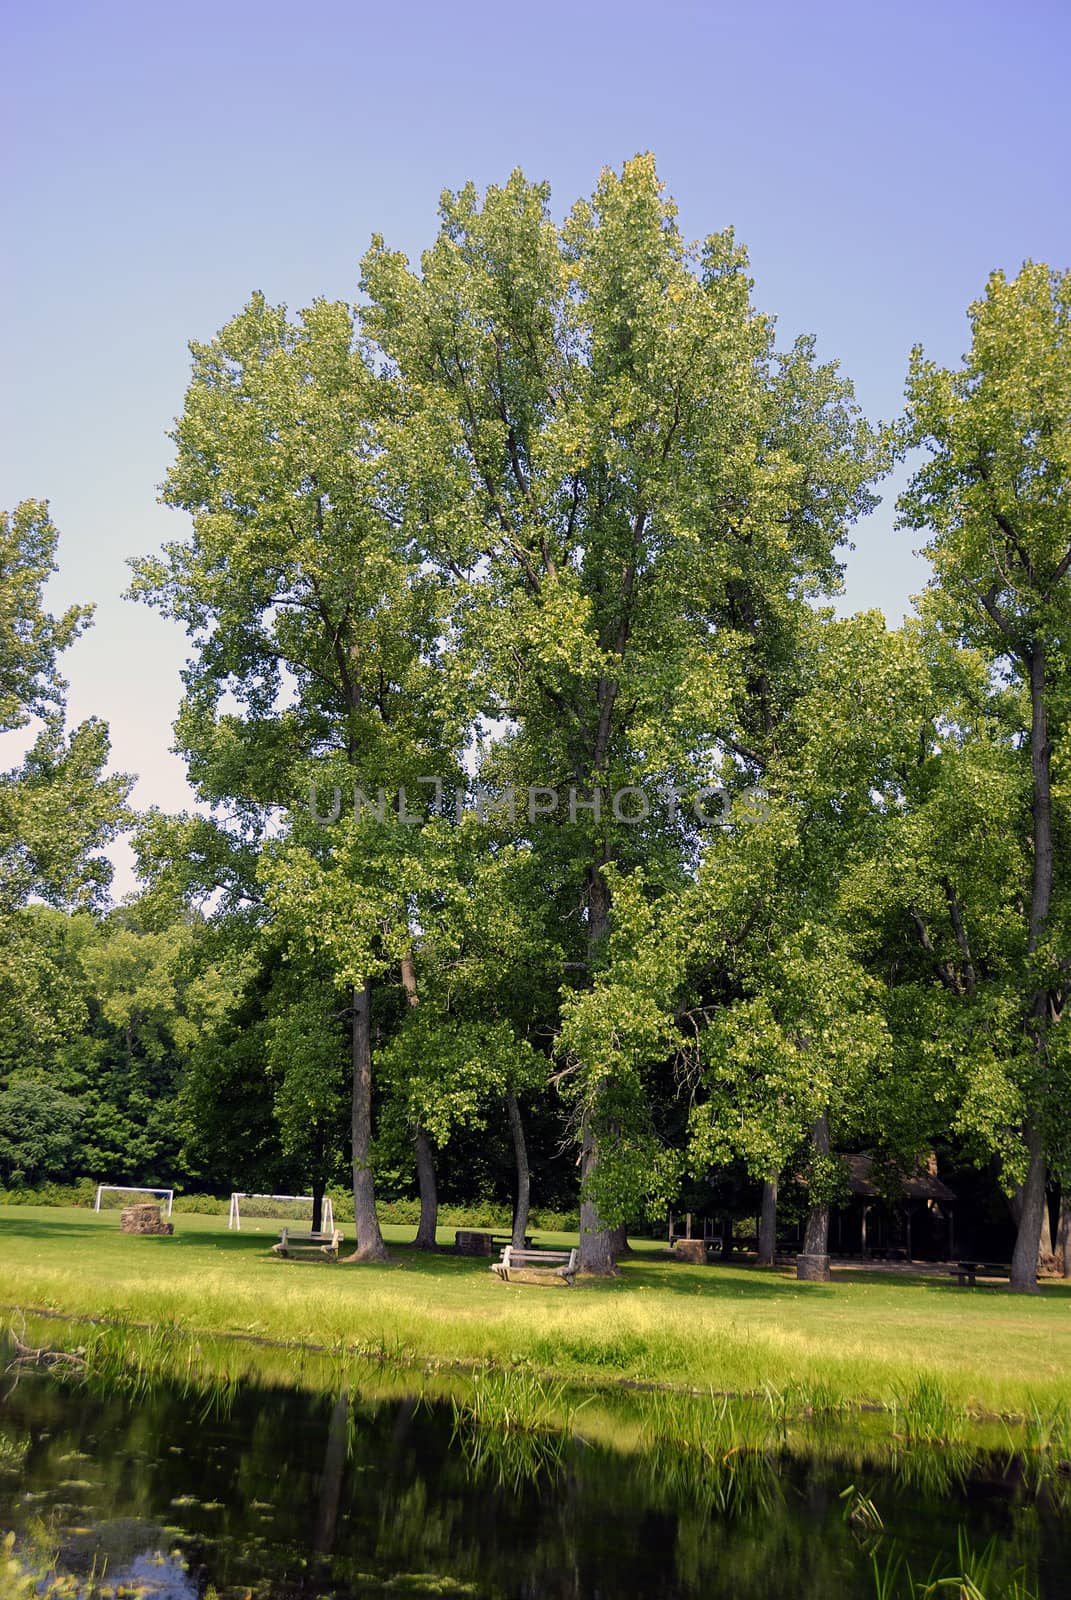 sunlit Green trees at a local park